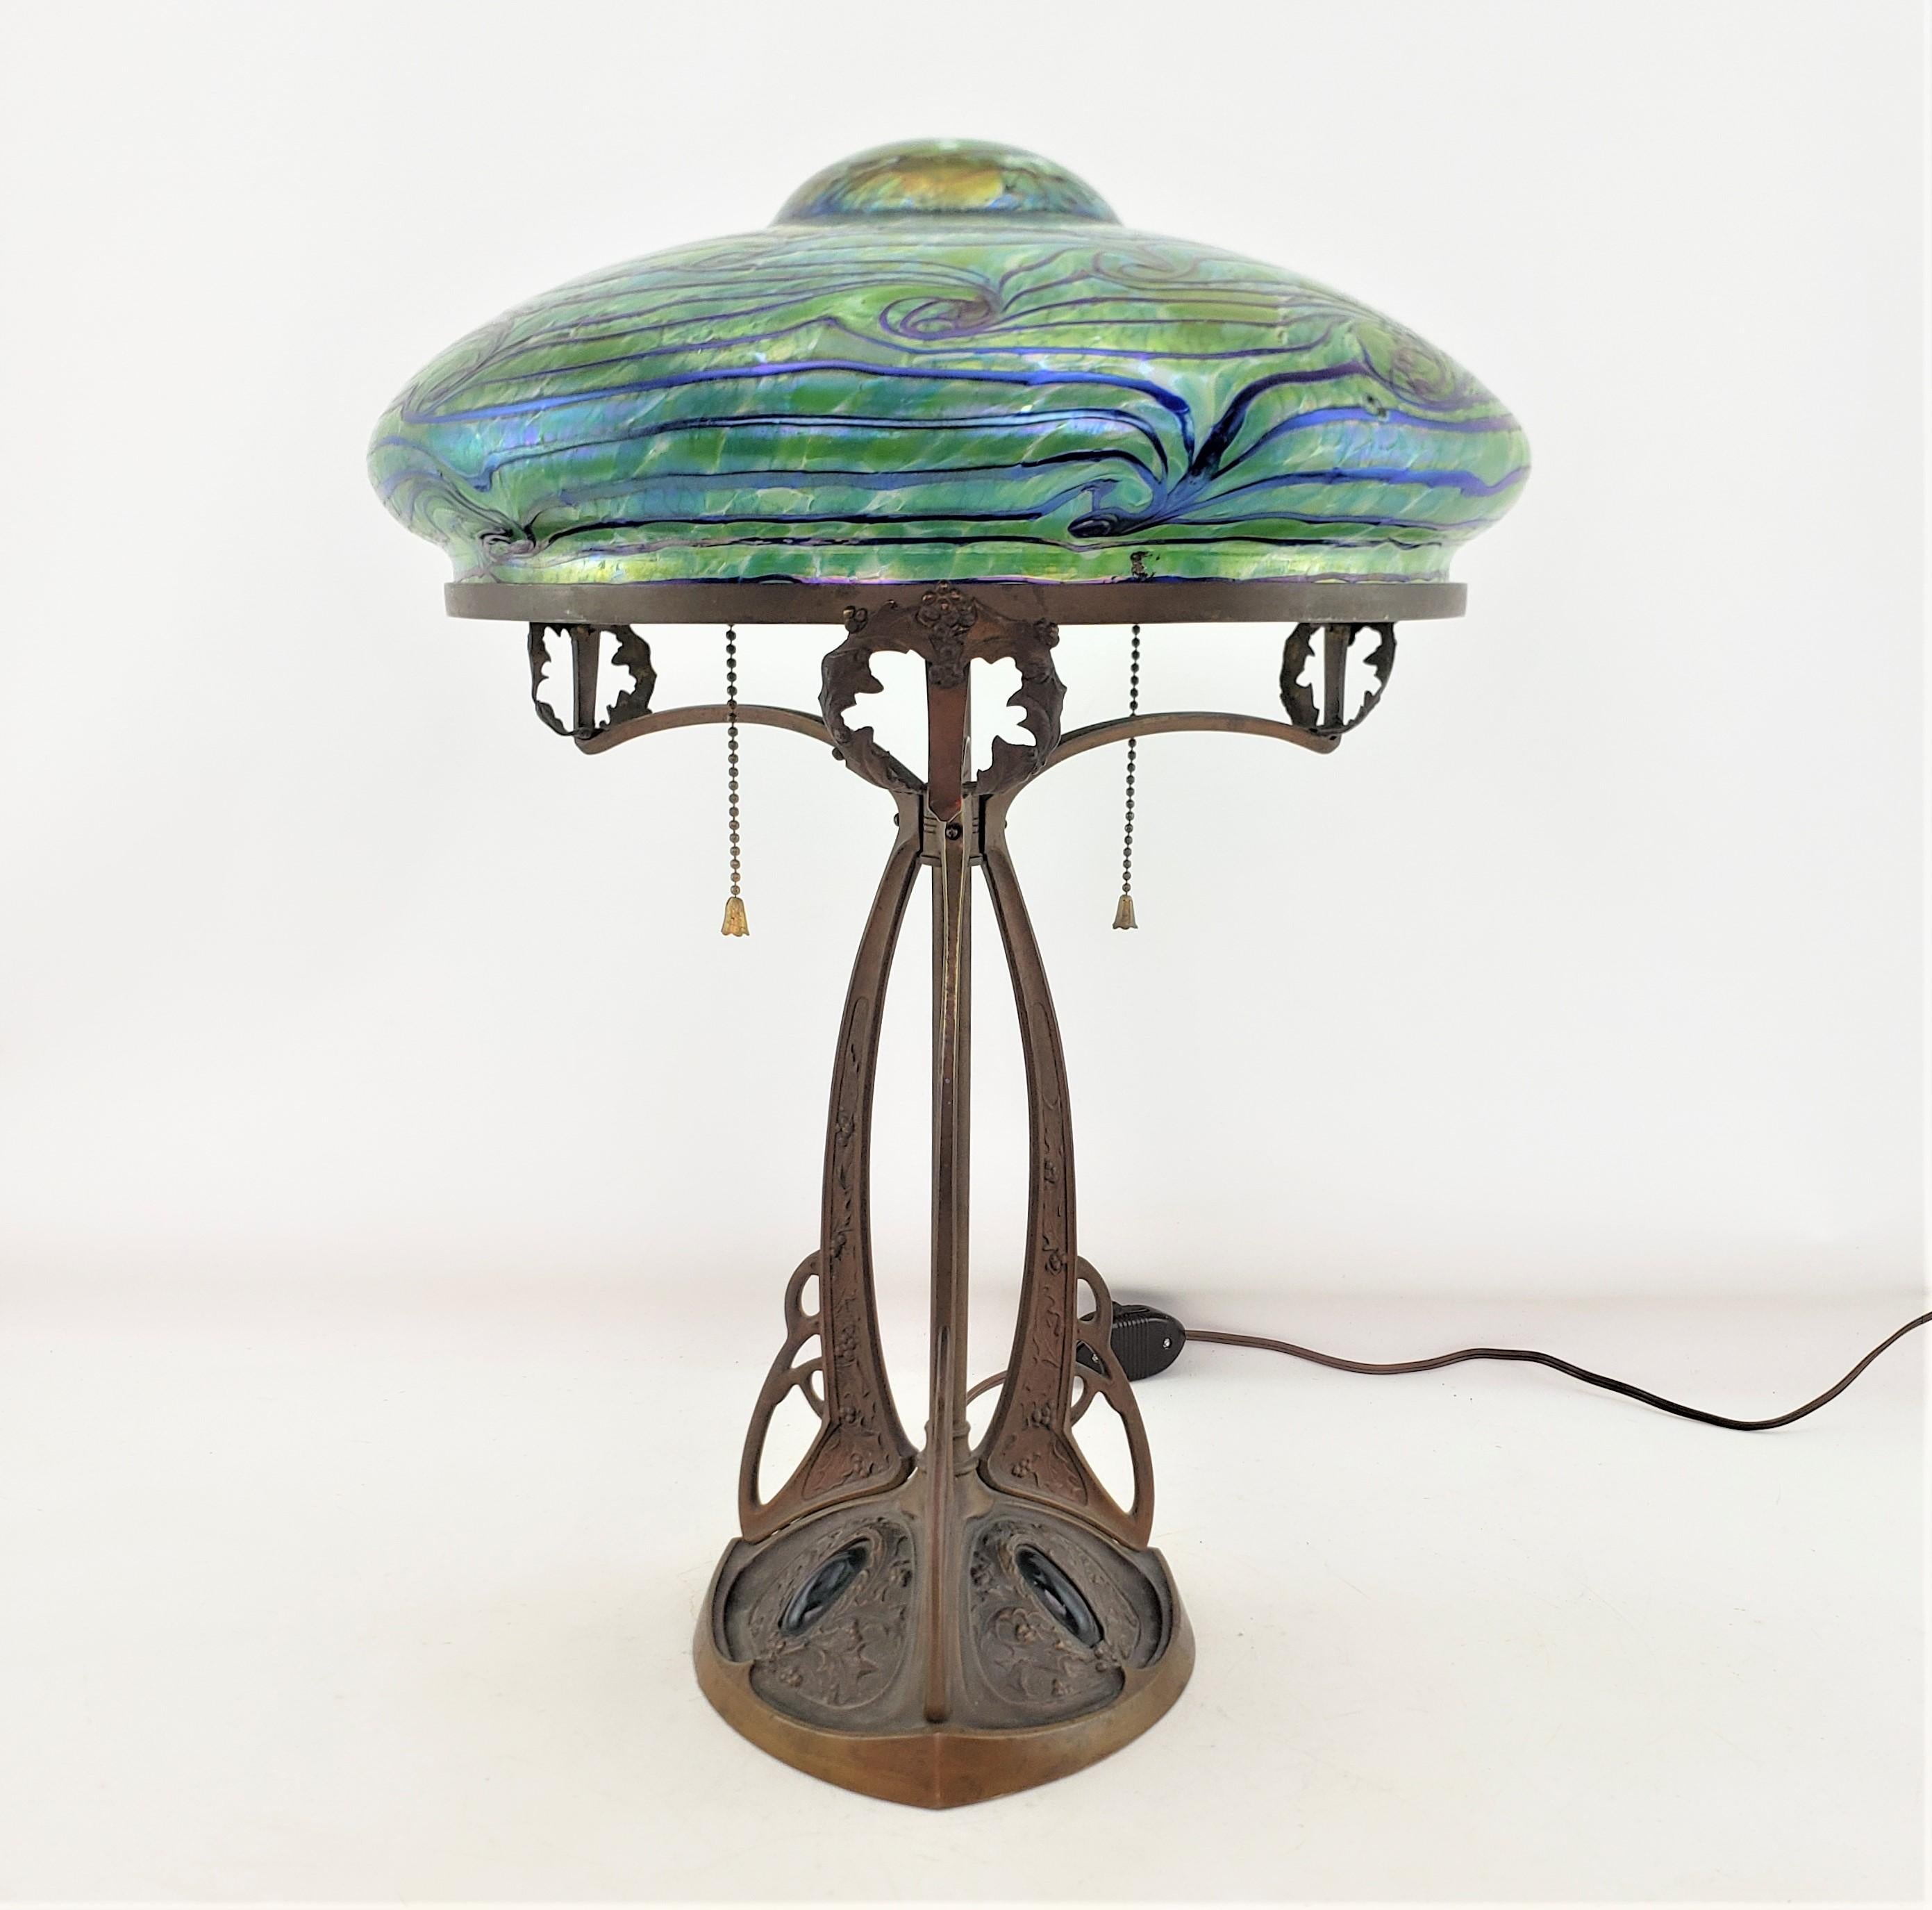 This antique table lamp is unsigned, but presumed to have originated from Austria and date to approximately 1900 and done in the period Art Nouveau style. The lamp base is composed of cast and patinated bronze with a stylized triangular shaped base